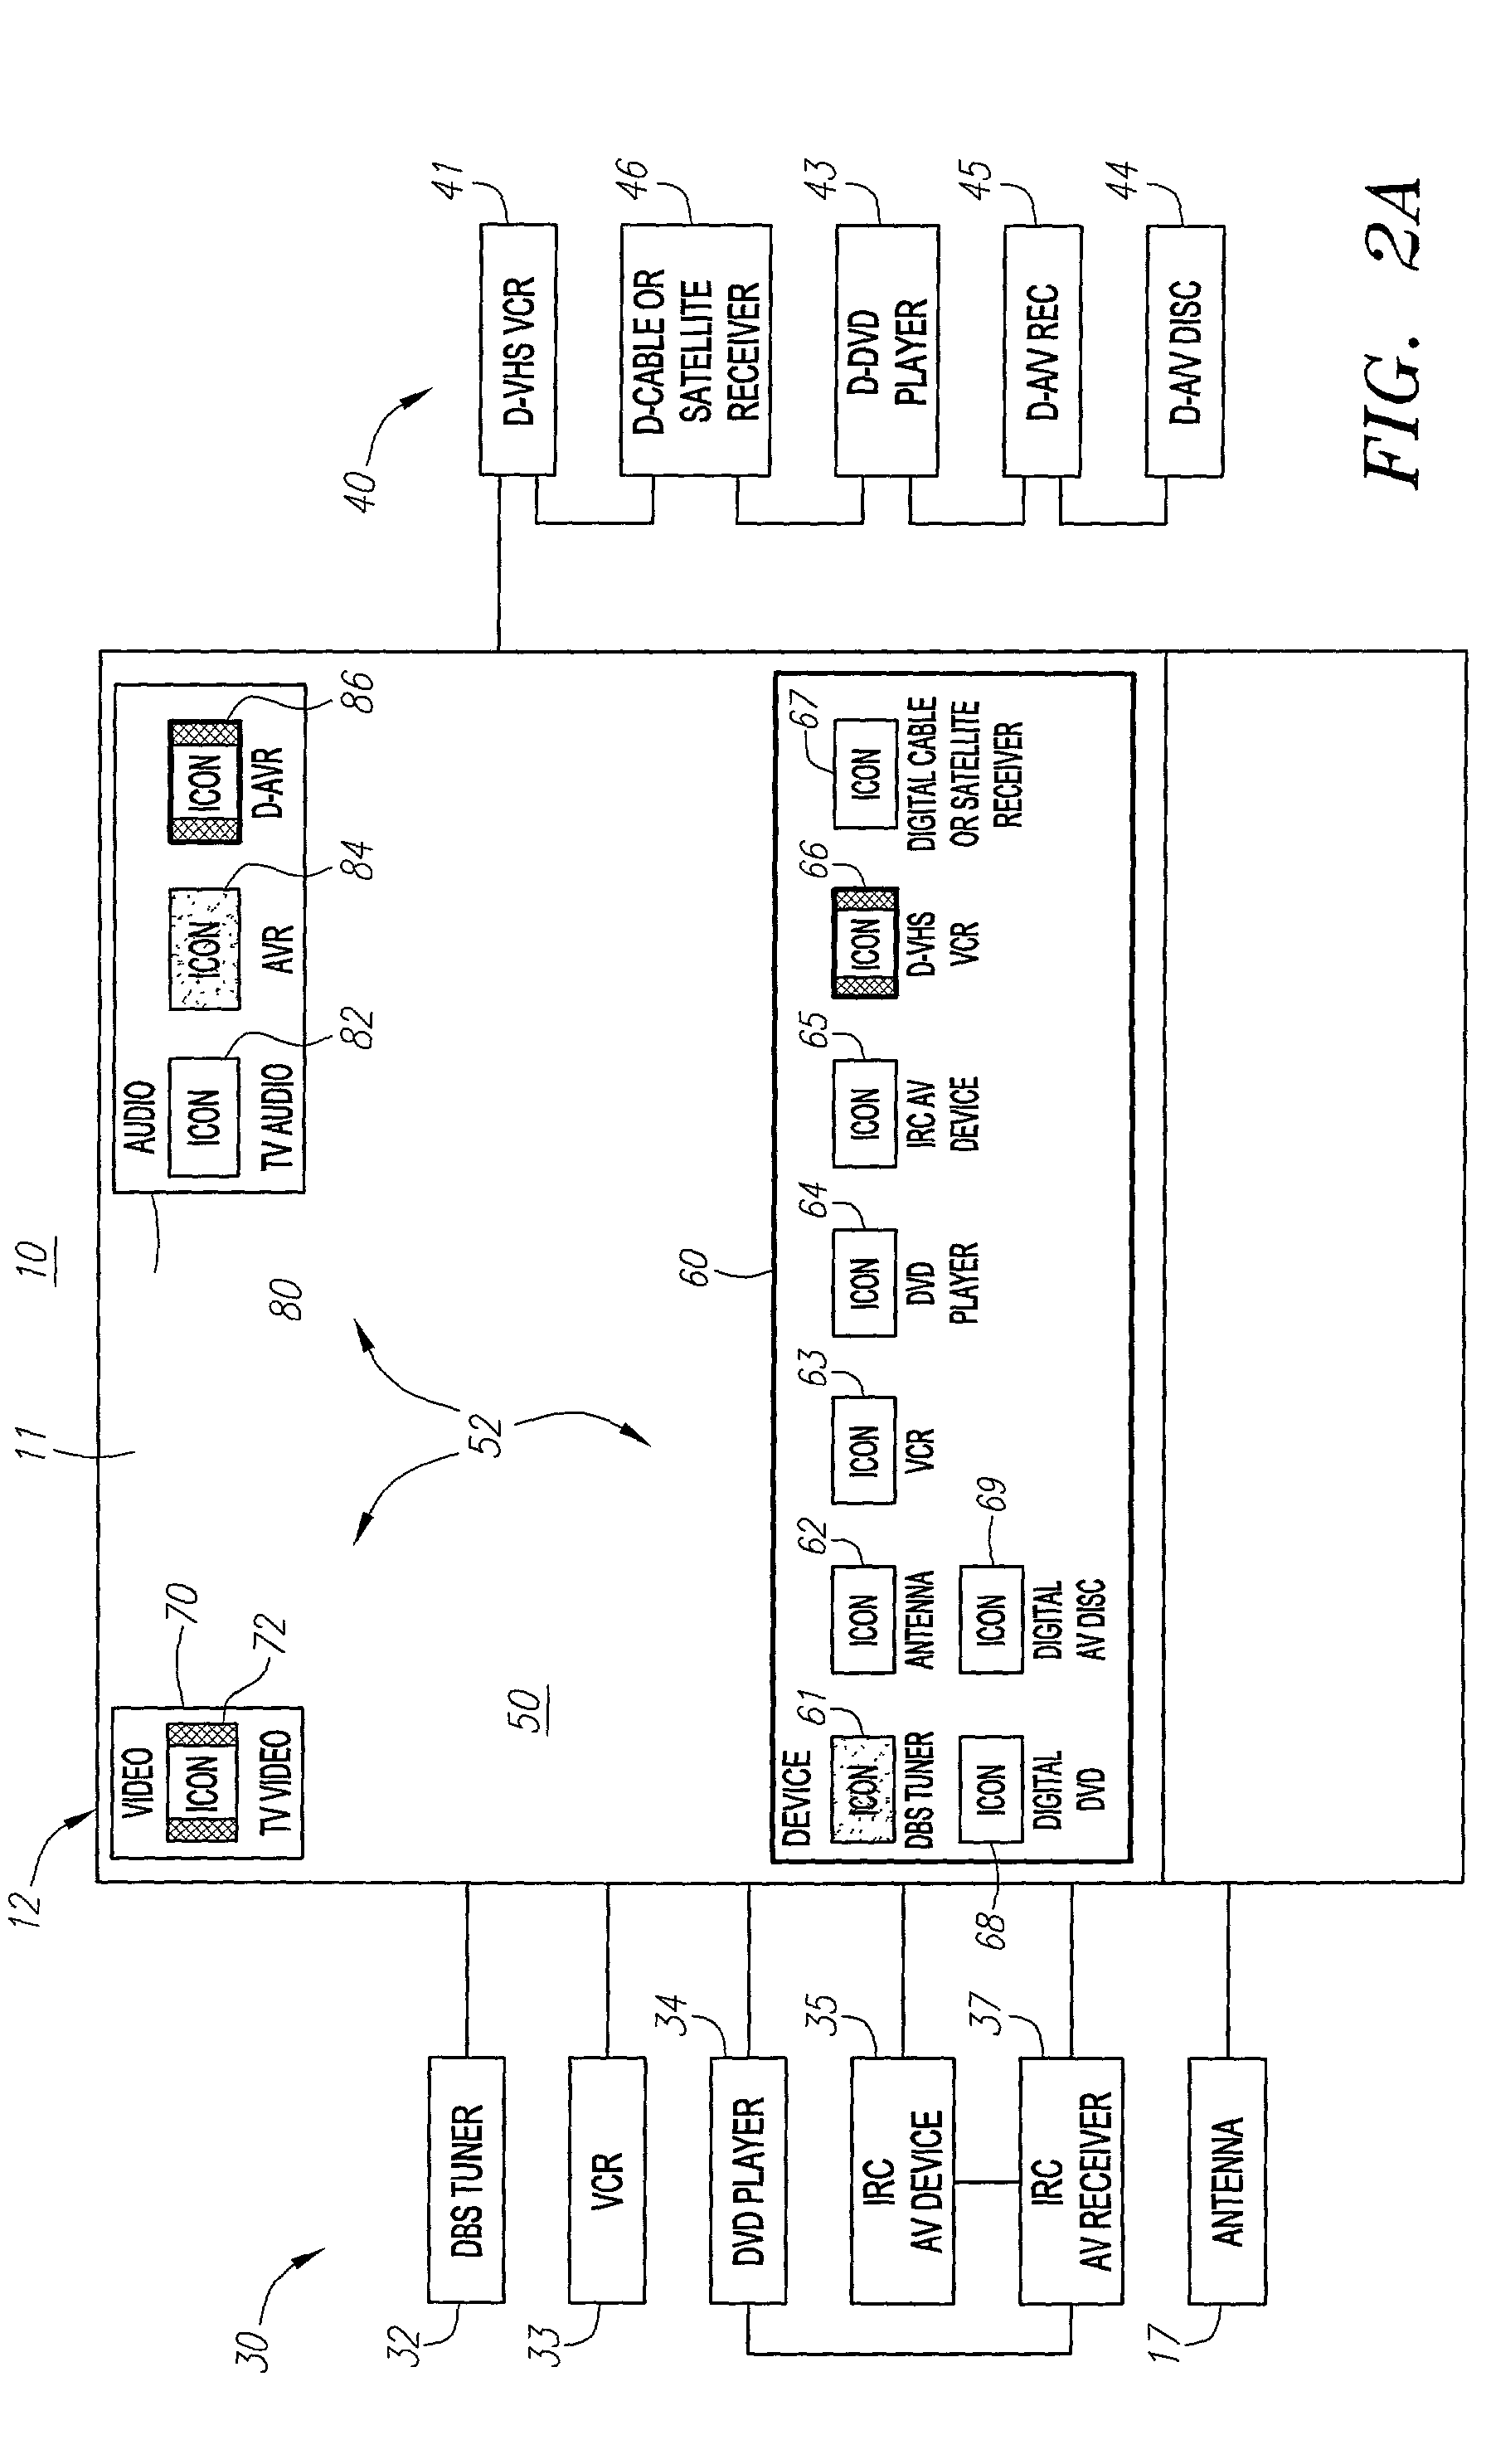 Control system and user interface for network of input devices